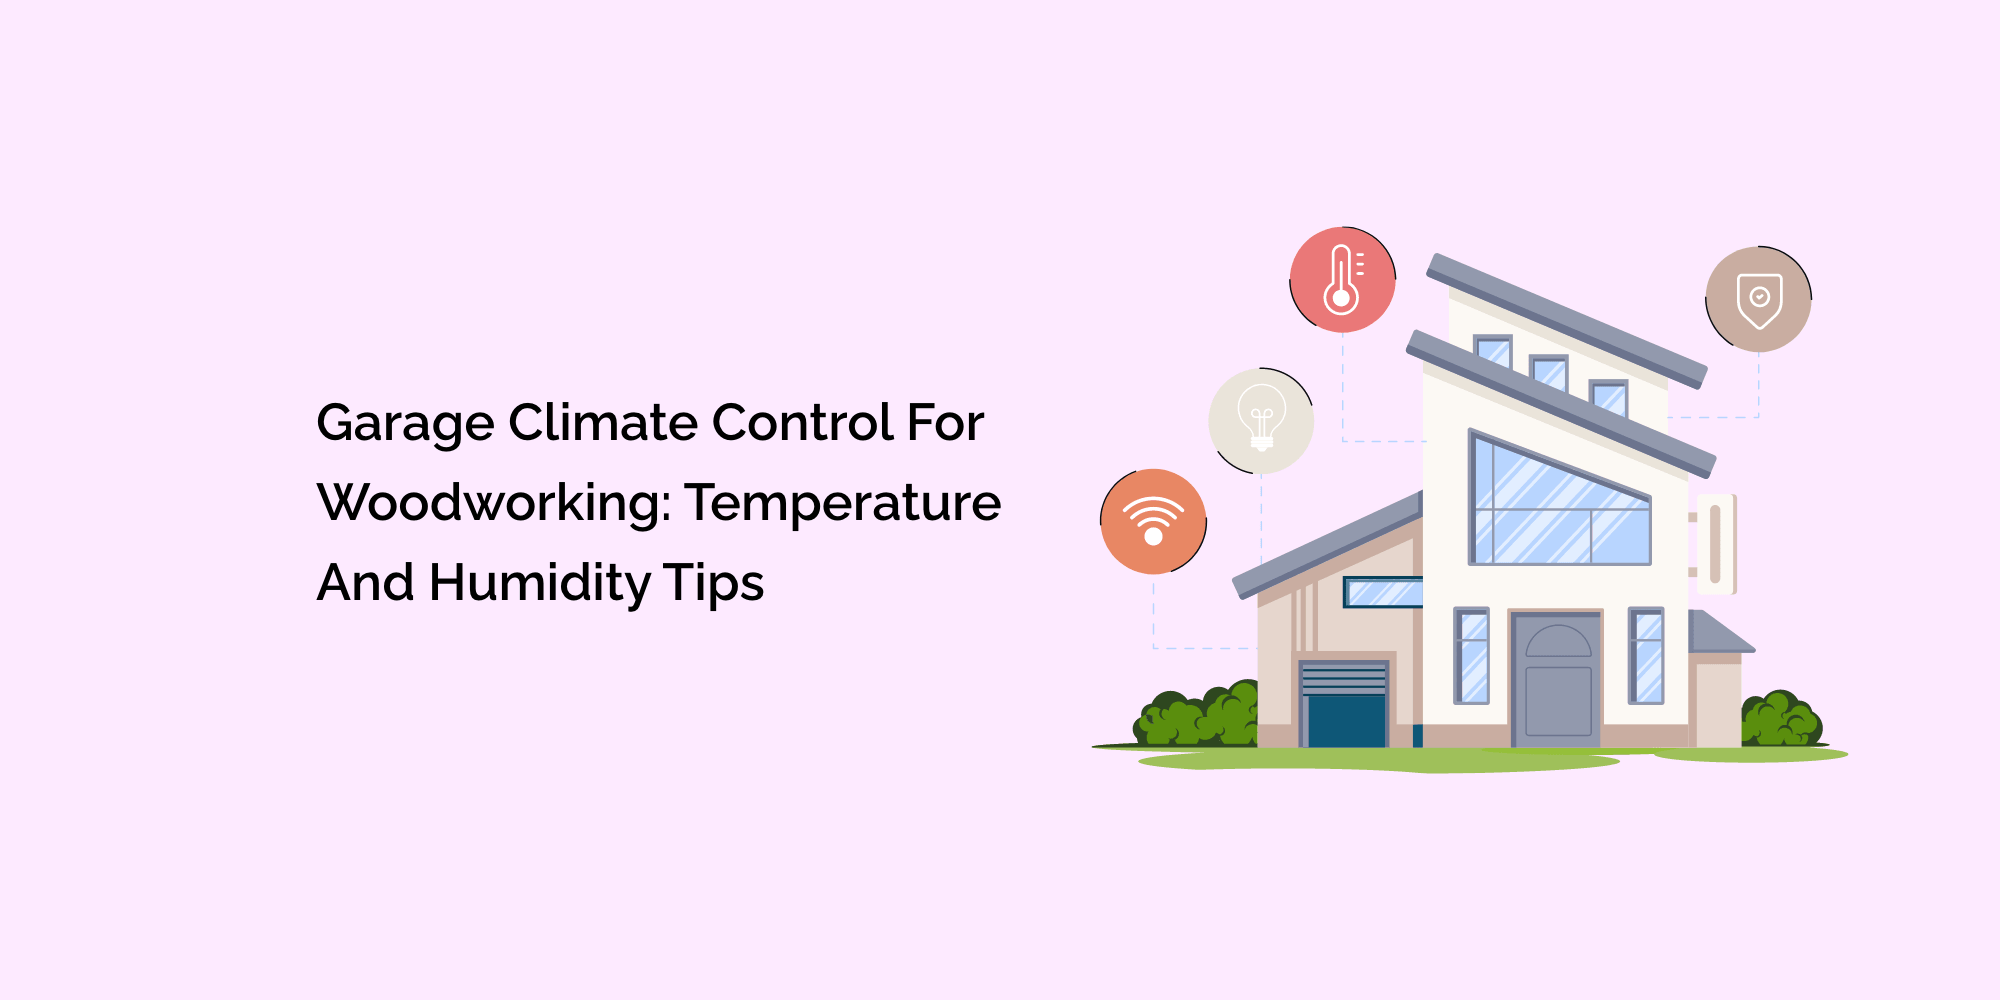 Garage Climate Control for Woodworking: Temperature and Humidity Tips